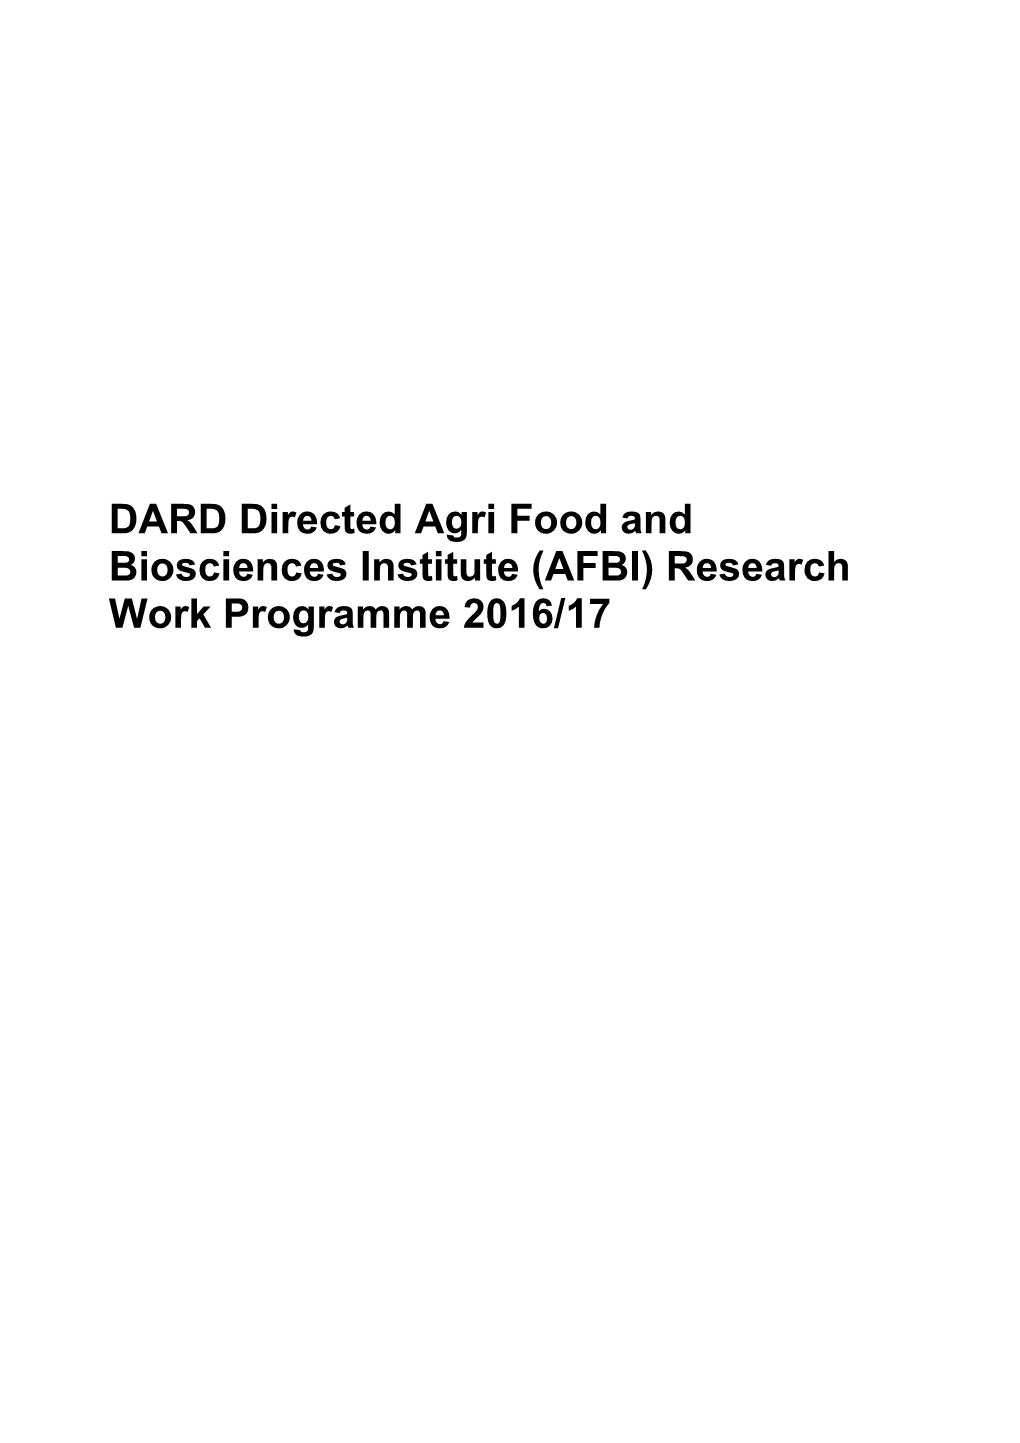 Dard Commissioned Research Call 2010/11